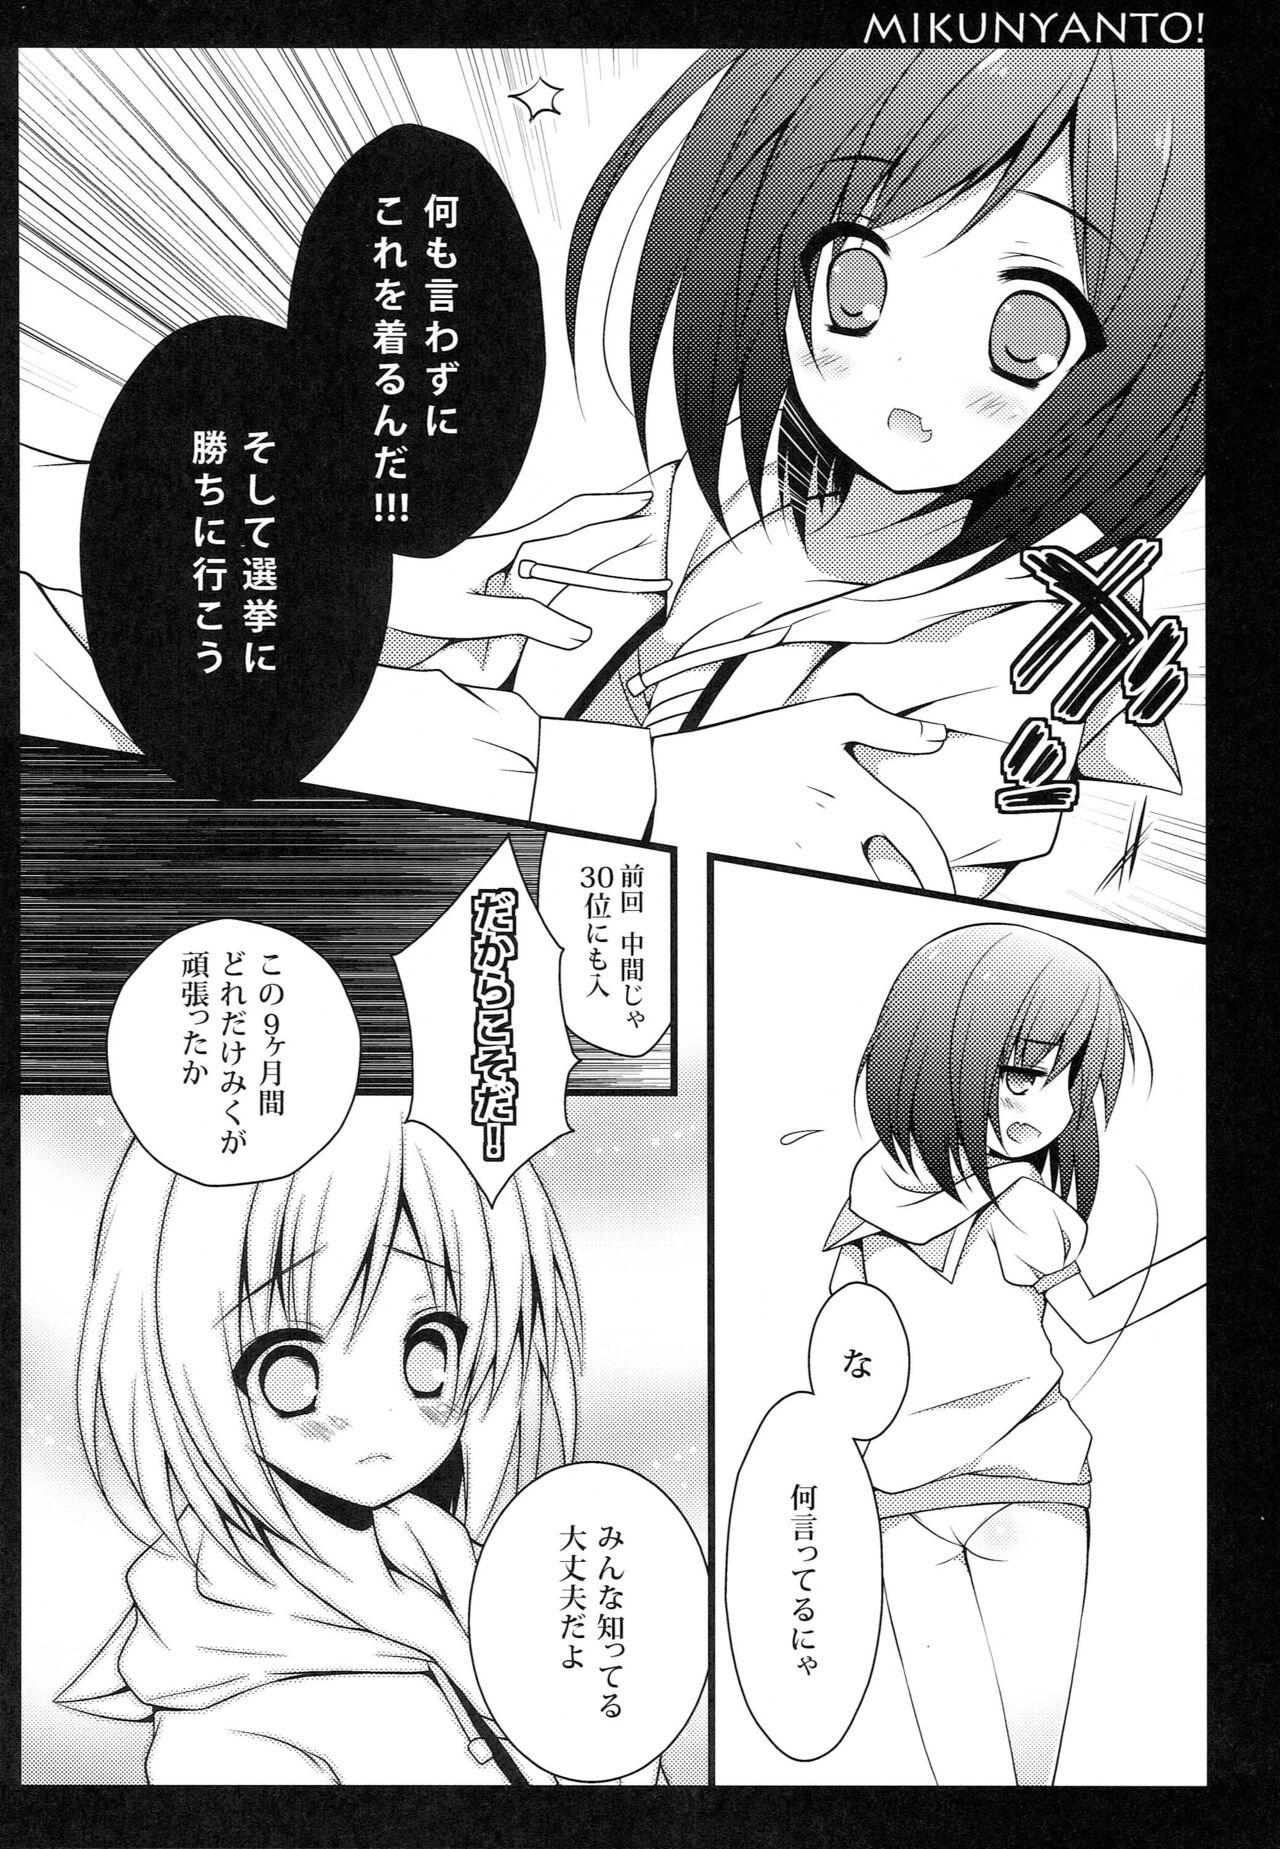 Bubblebutt Miku Nyan to! - The idolmaster Double - Page 7